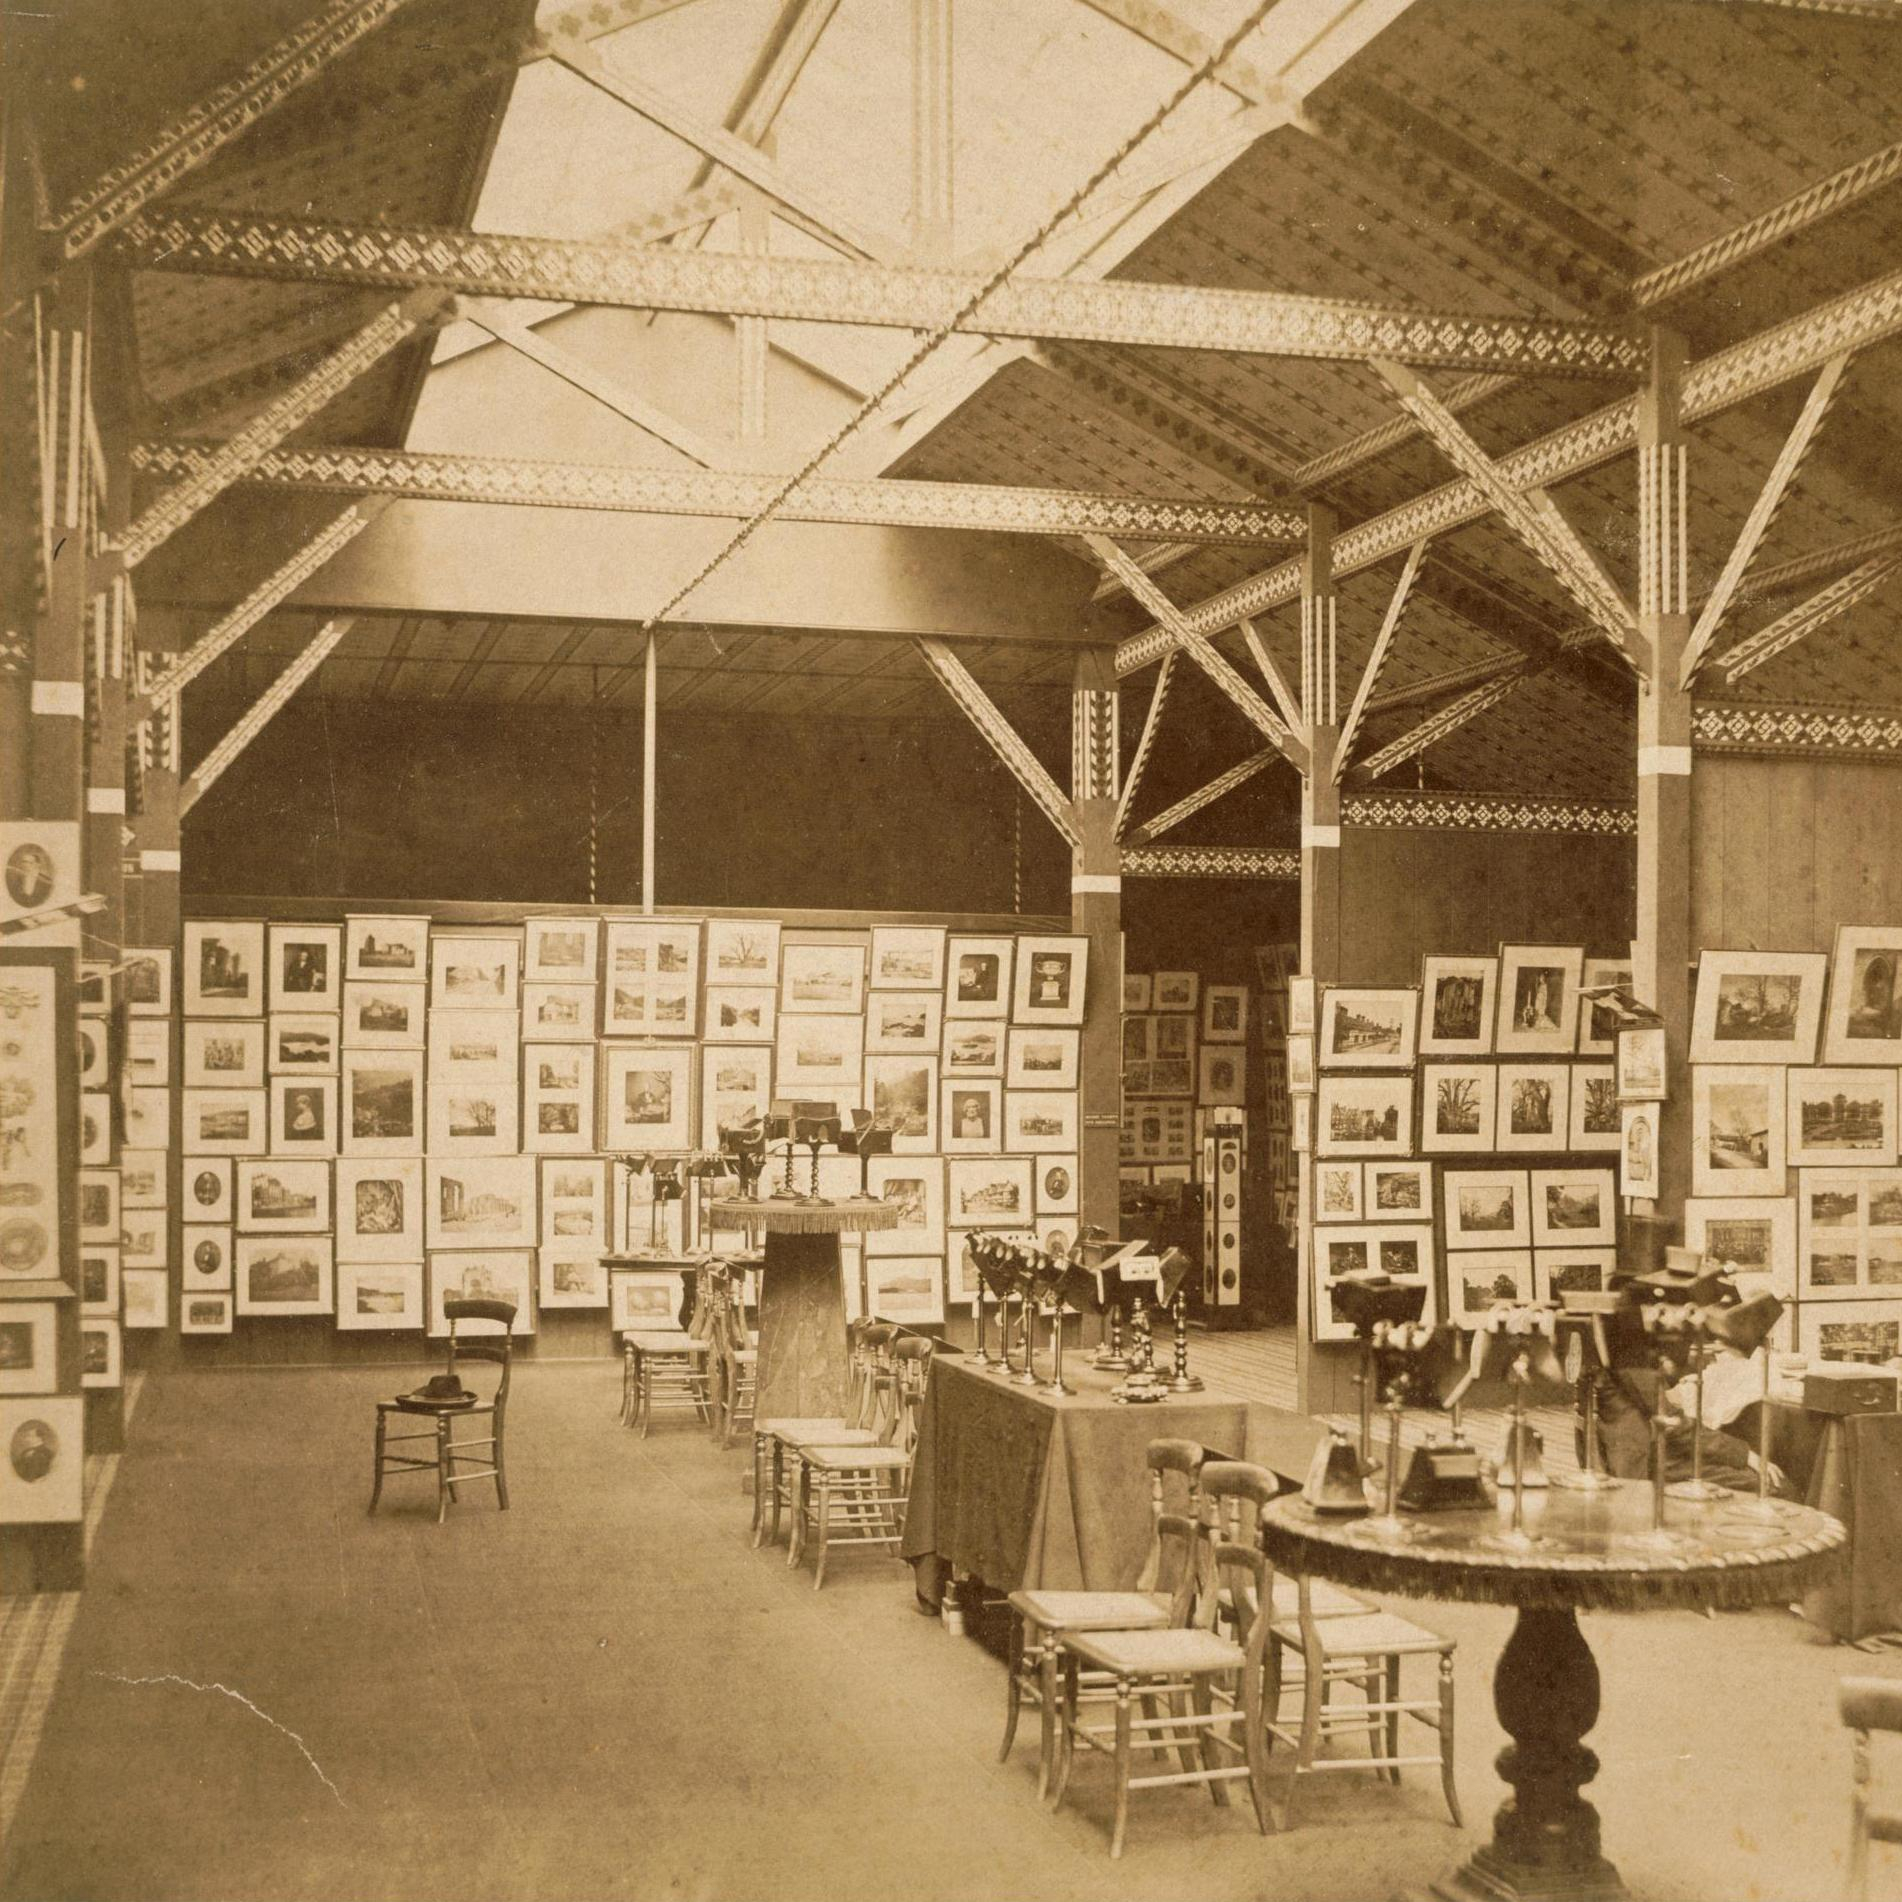 Charles Thurston Thompson, Exhibition of the Photographic Society at the South Kensington Museum, 1858 copyright Victoria and Albert Museum, London